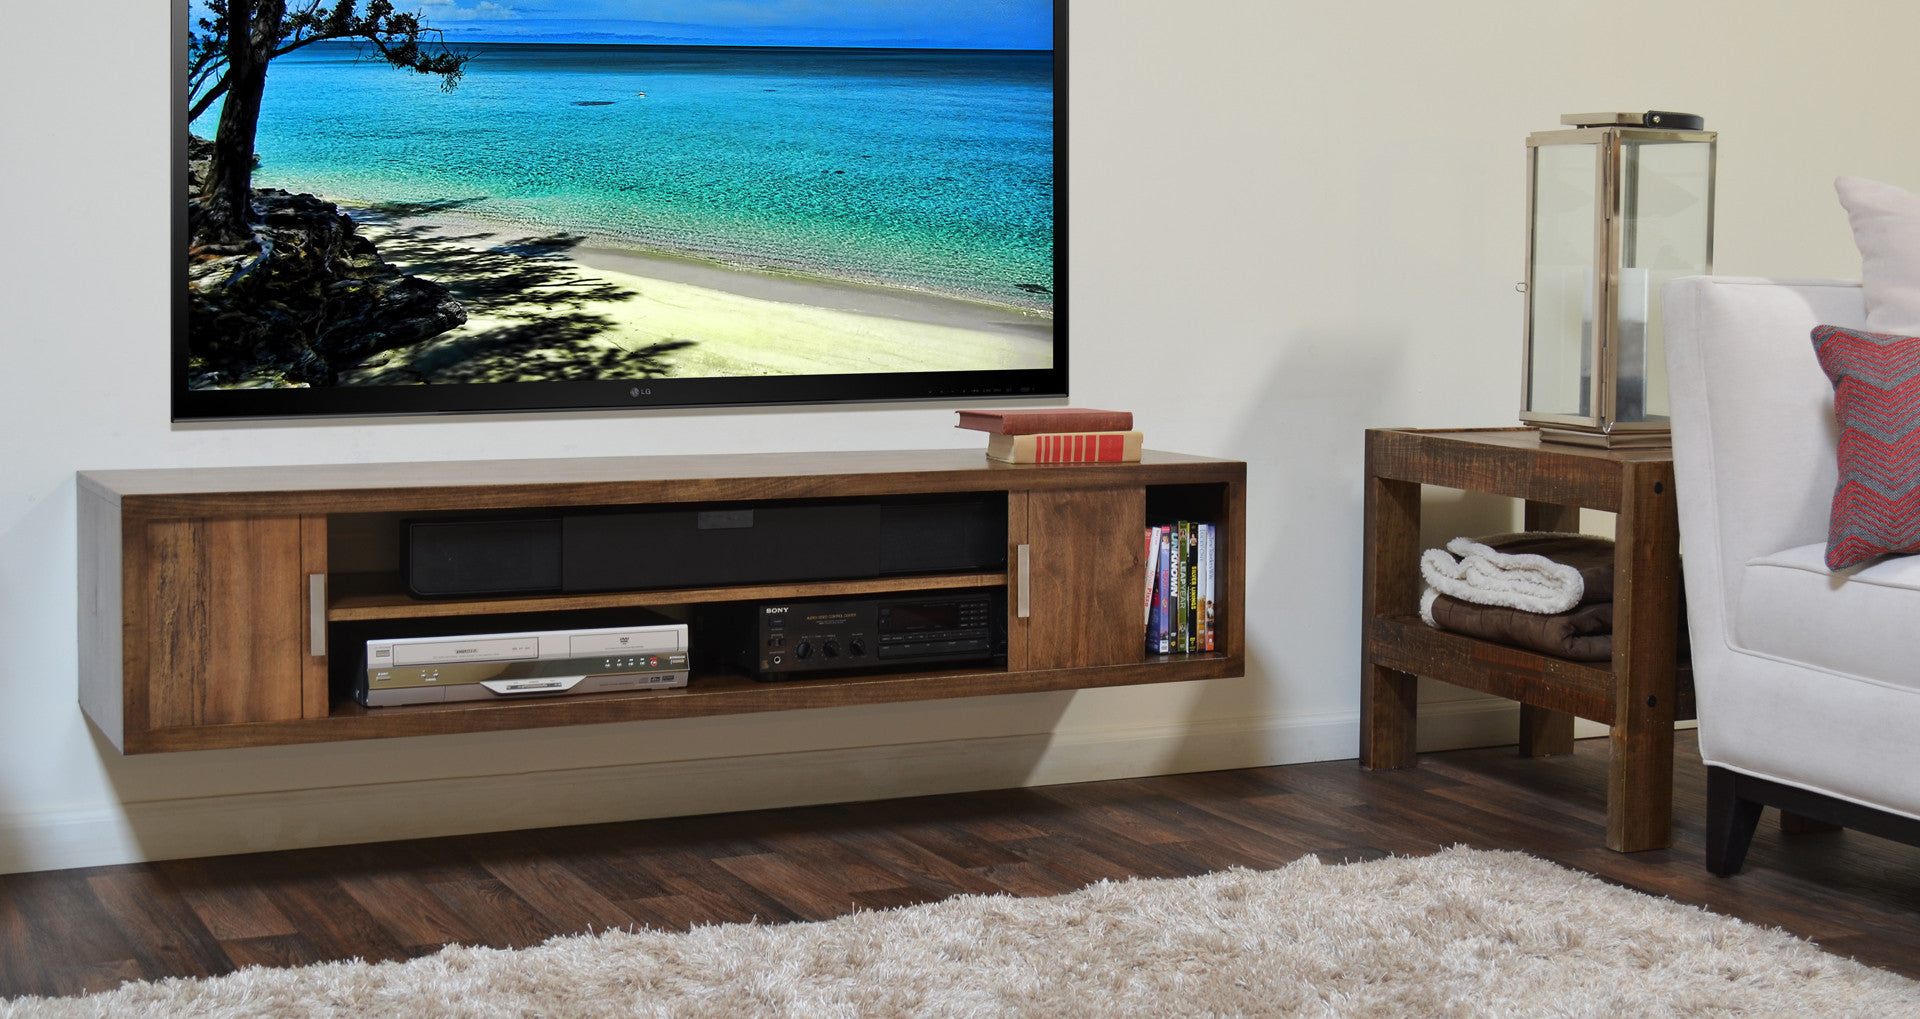 Pallet Tv Wall Mount - Viewing Gallery